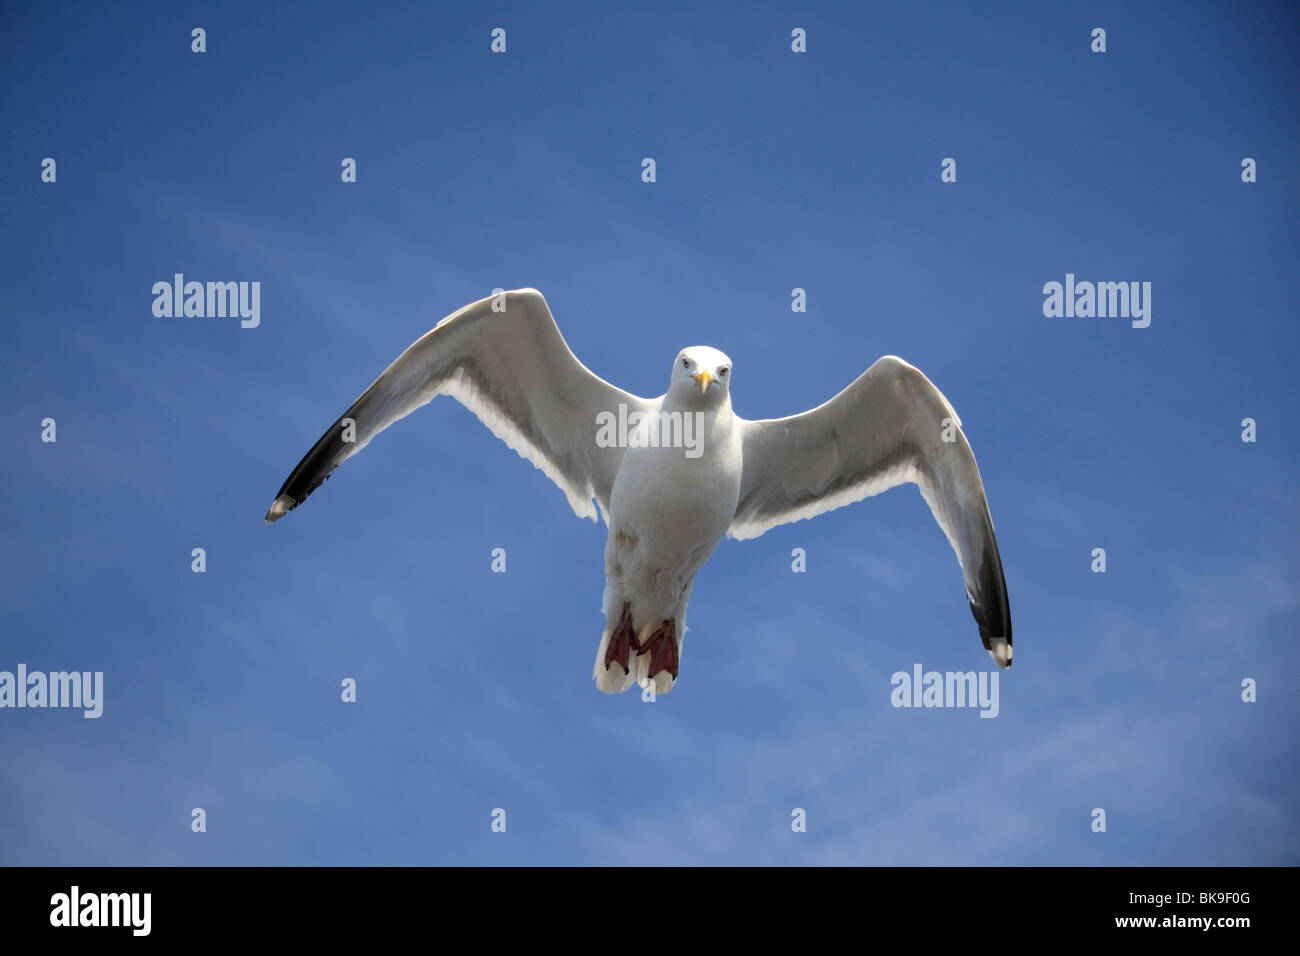 A Herring Gull (Seagull) flying against a blue sky on St Georges Channel, Irish Sea Stock Photo